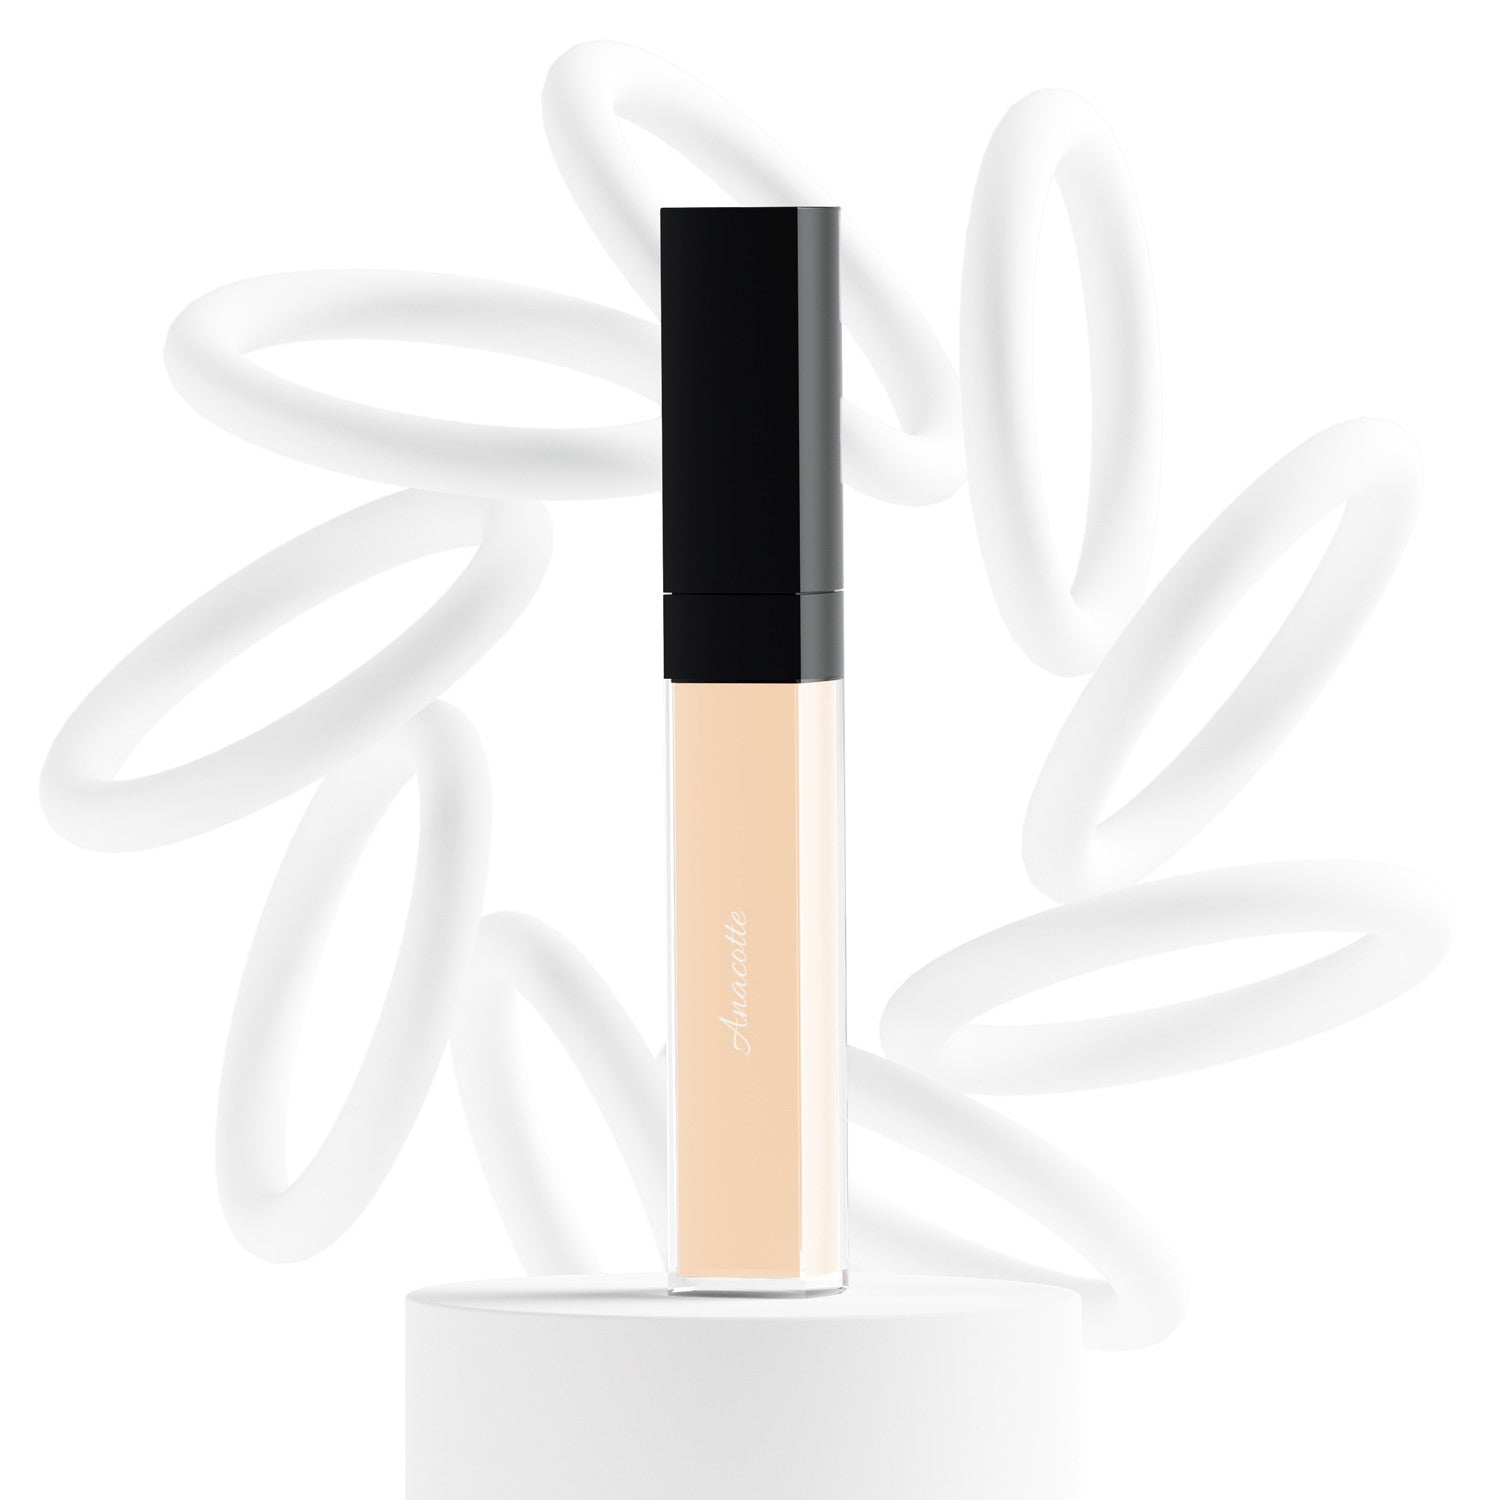 Anacotte's Warm-Tone Concealers for Flawless Skin